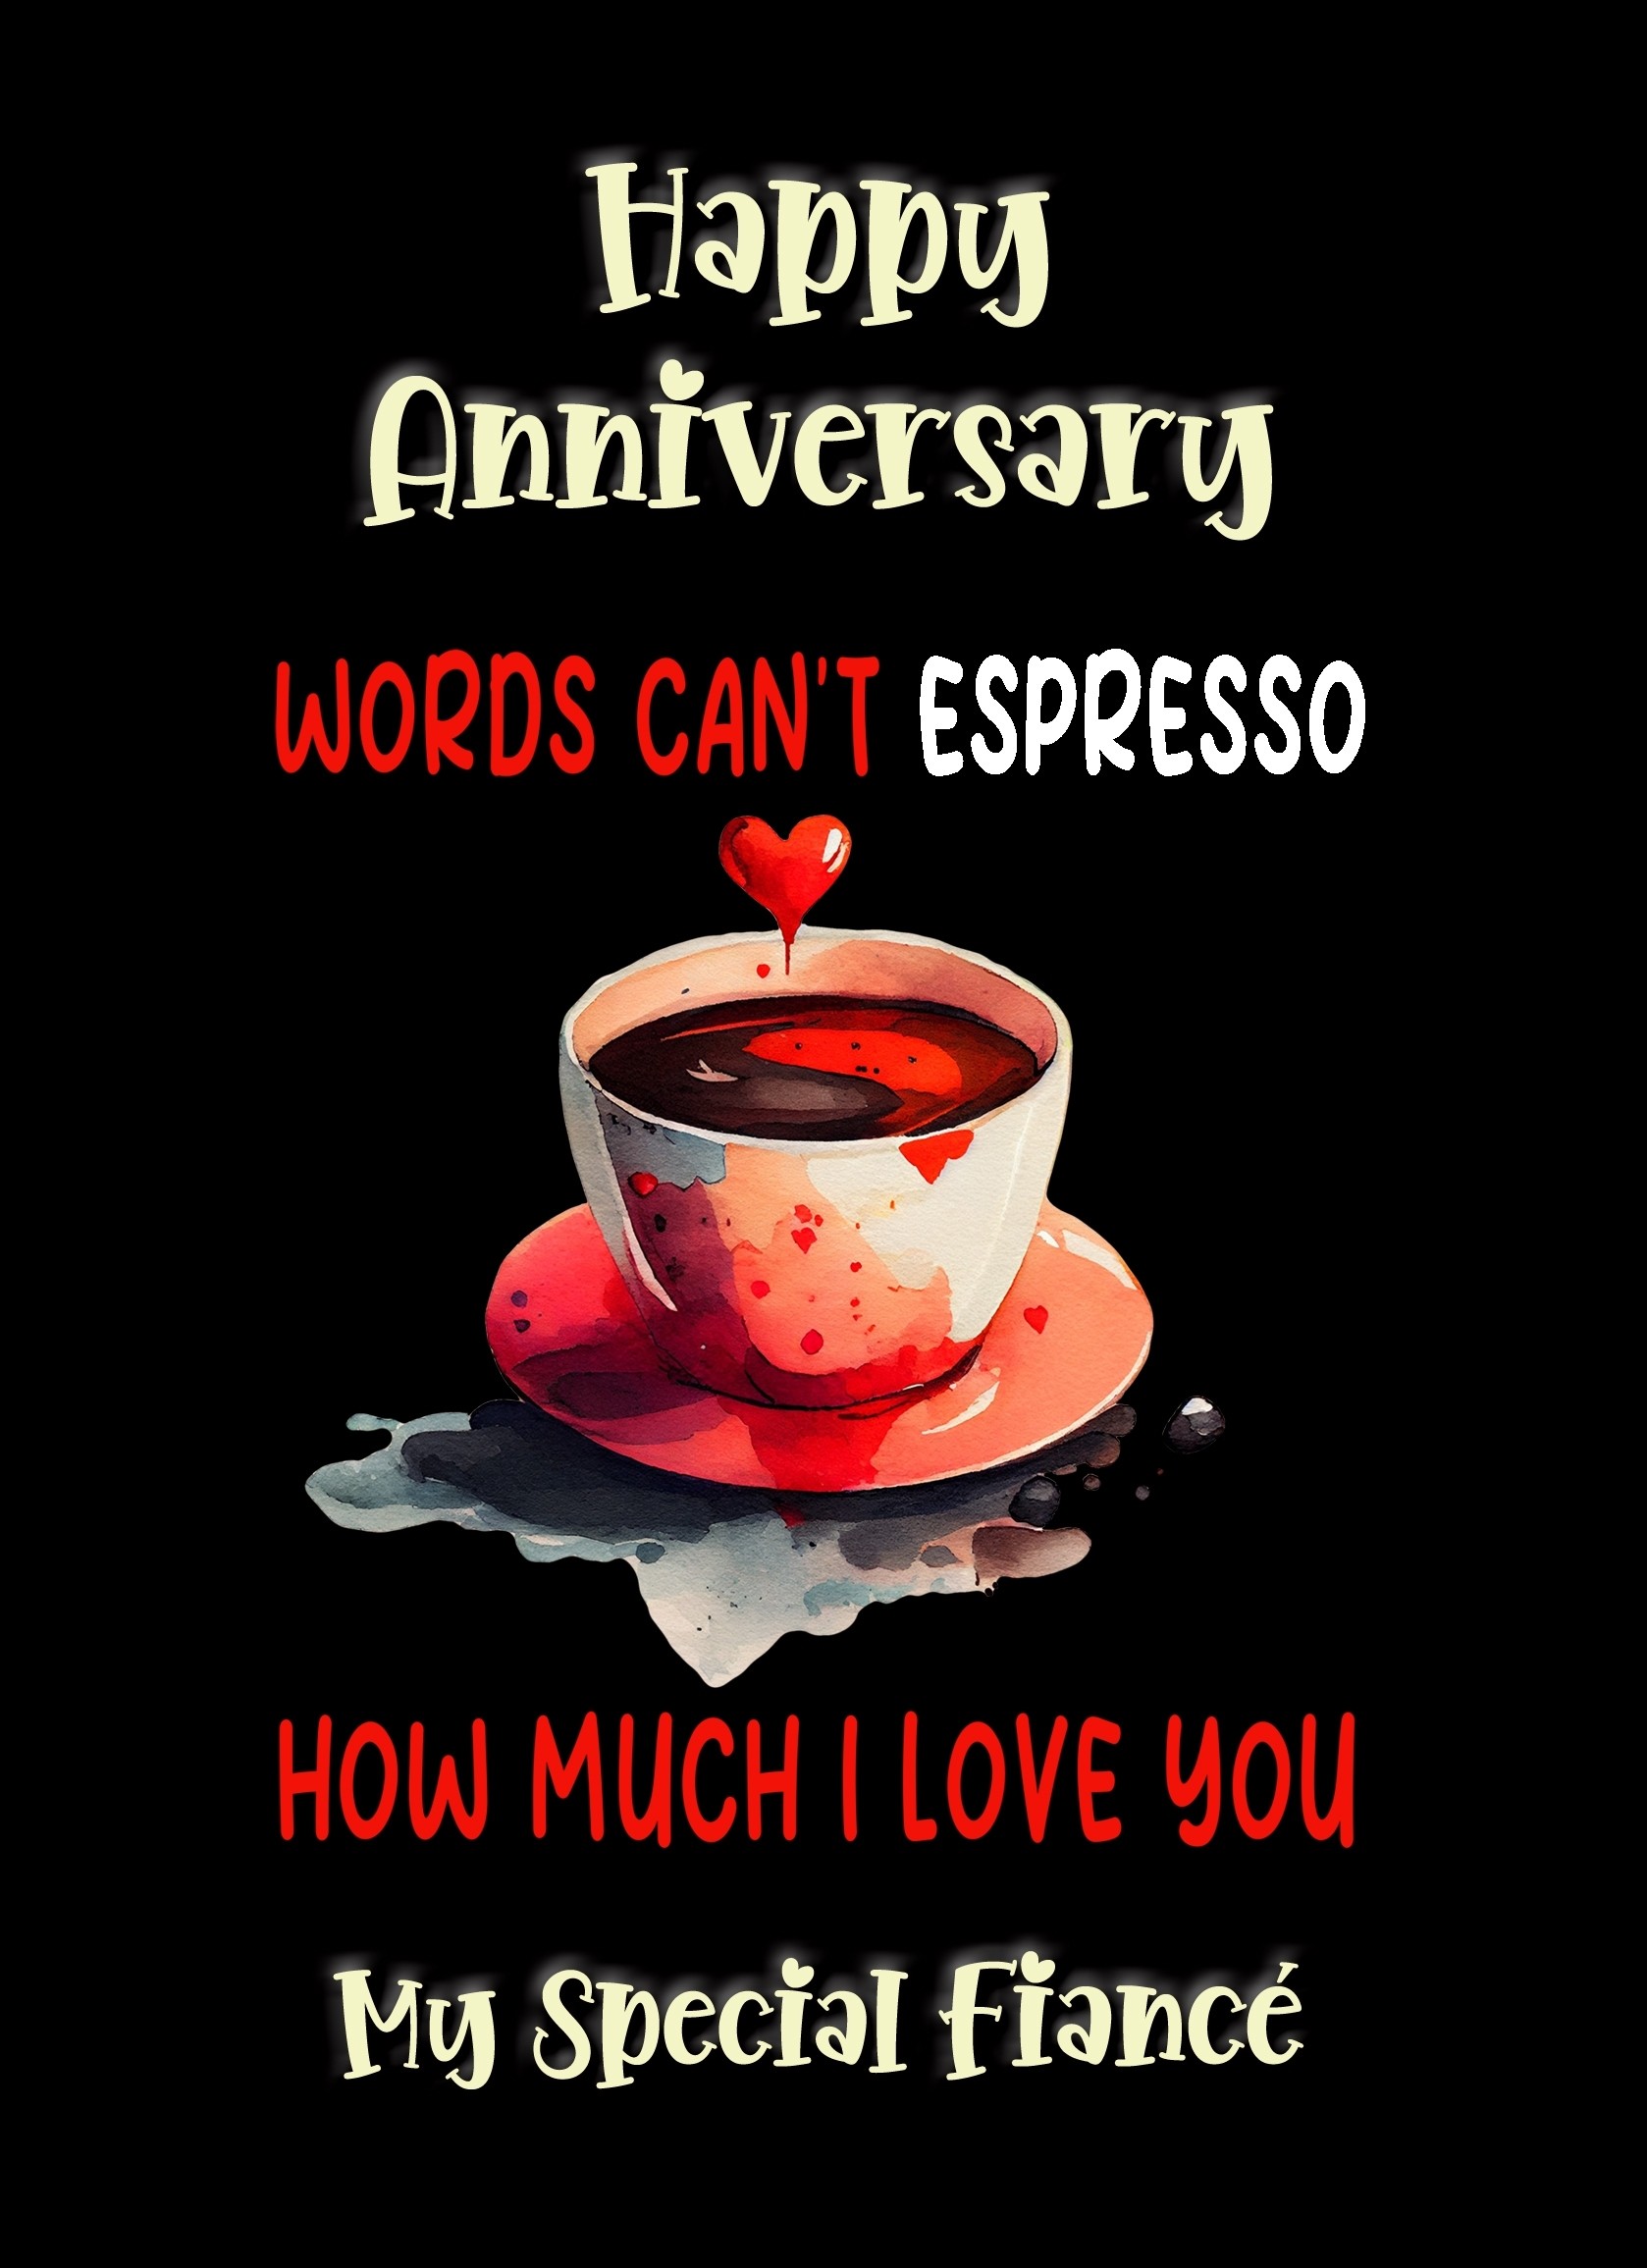 Funny Pun Romantic Anniversary Card for Fiance (Can't Espresso)